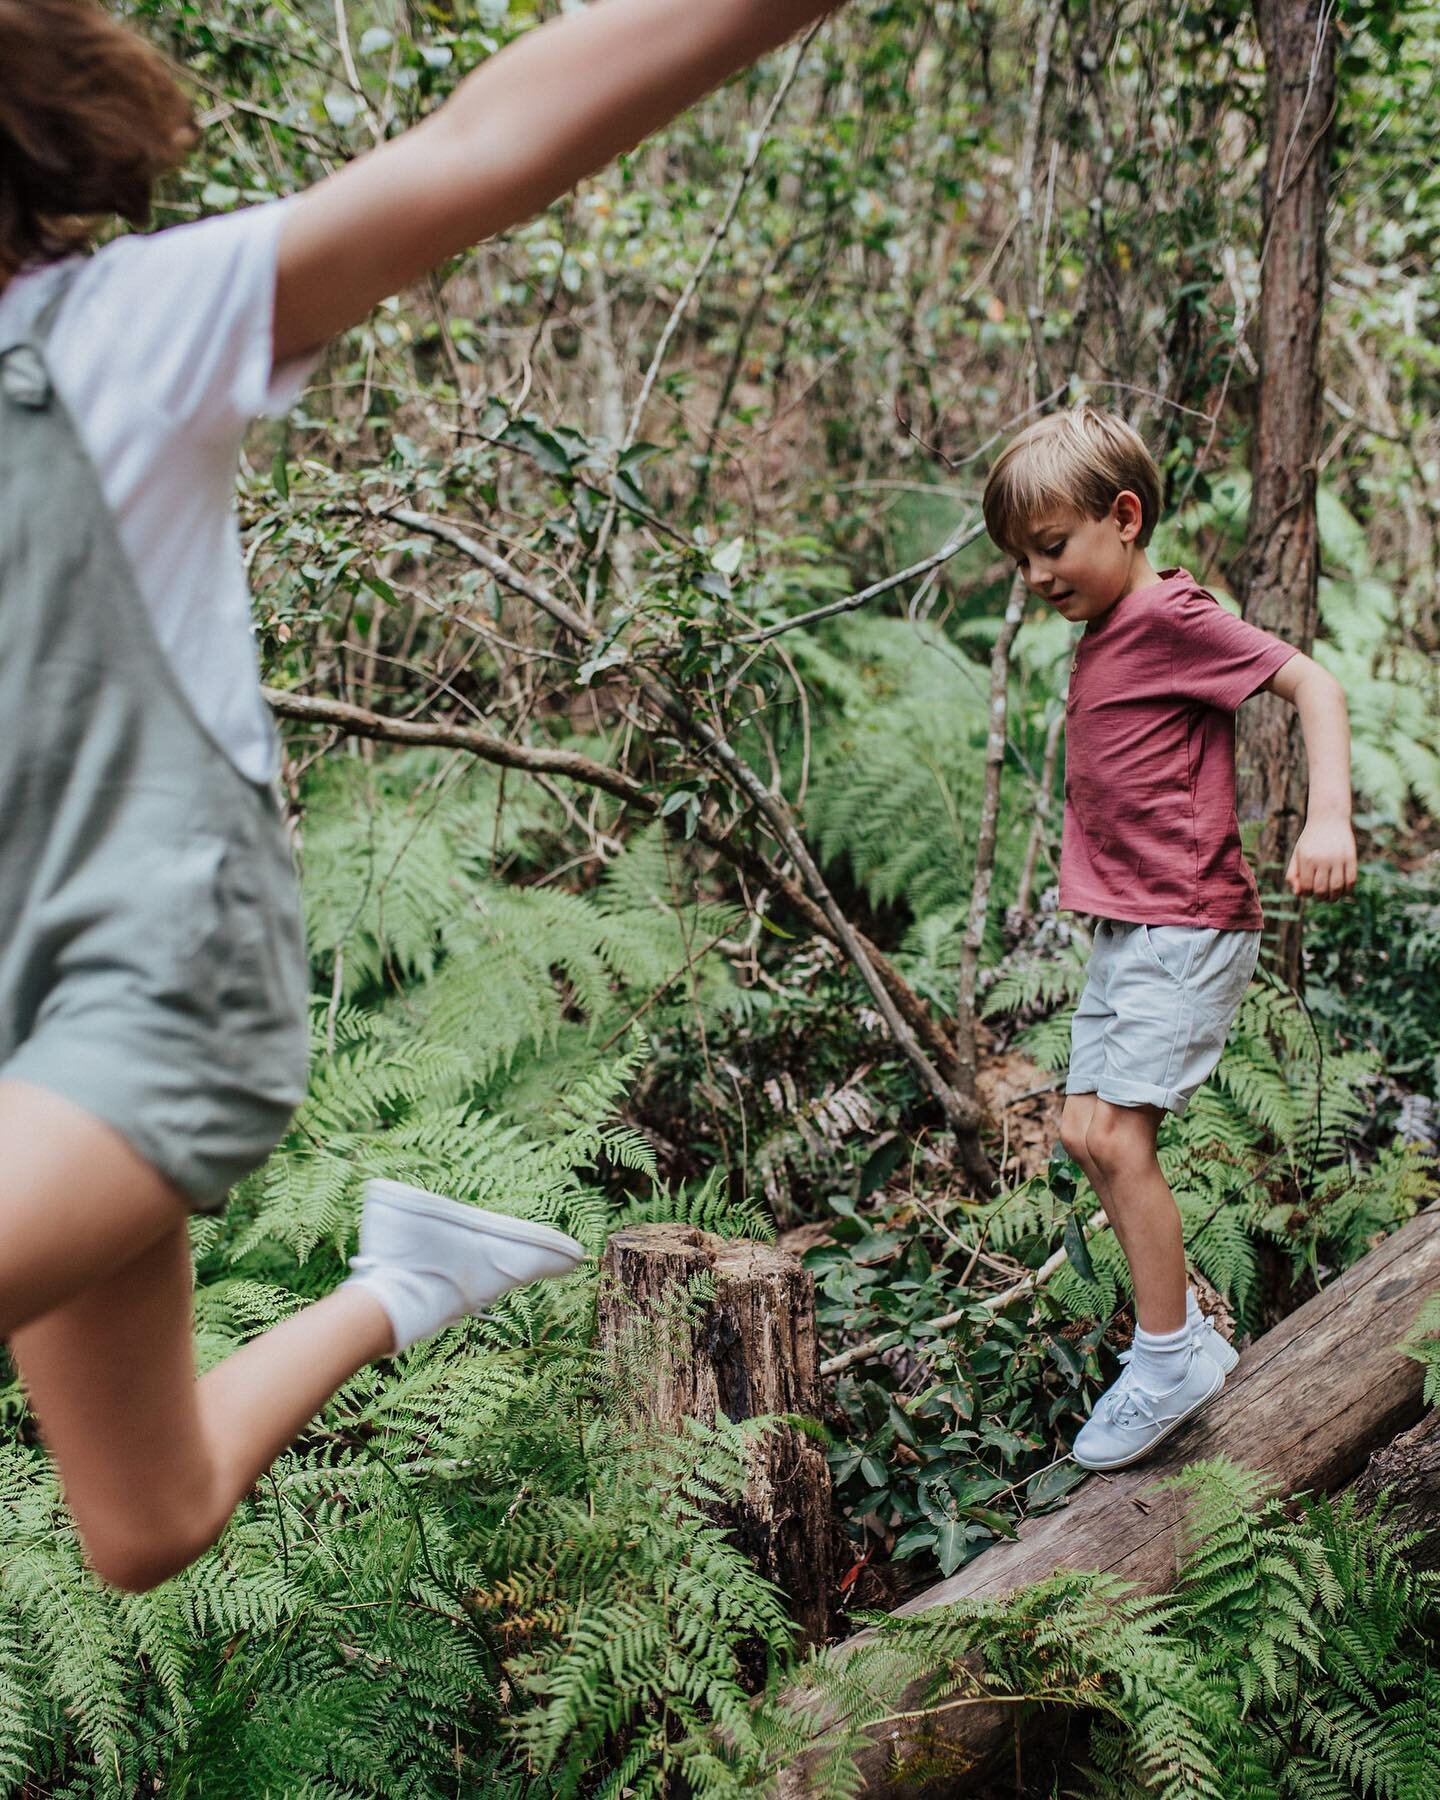 More adventure. More fun. More dirty feet. More crazy kids. More climbing trees. More exploring. More happy parents. More you! Finish your shoot wet, dirty and grinning from ear to ear! If that&rsquo;s your thing. Do what you love and let me capture 